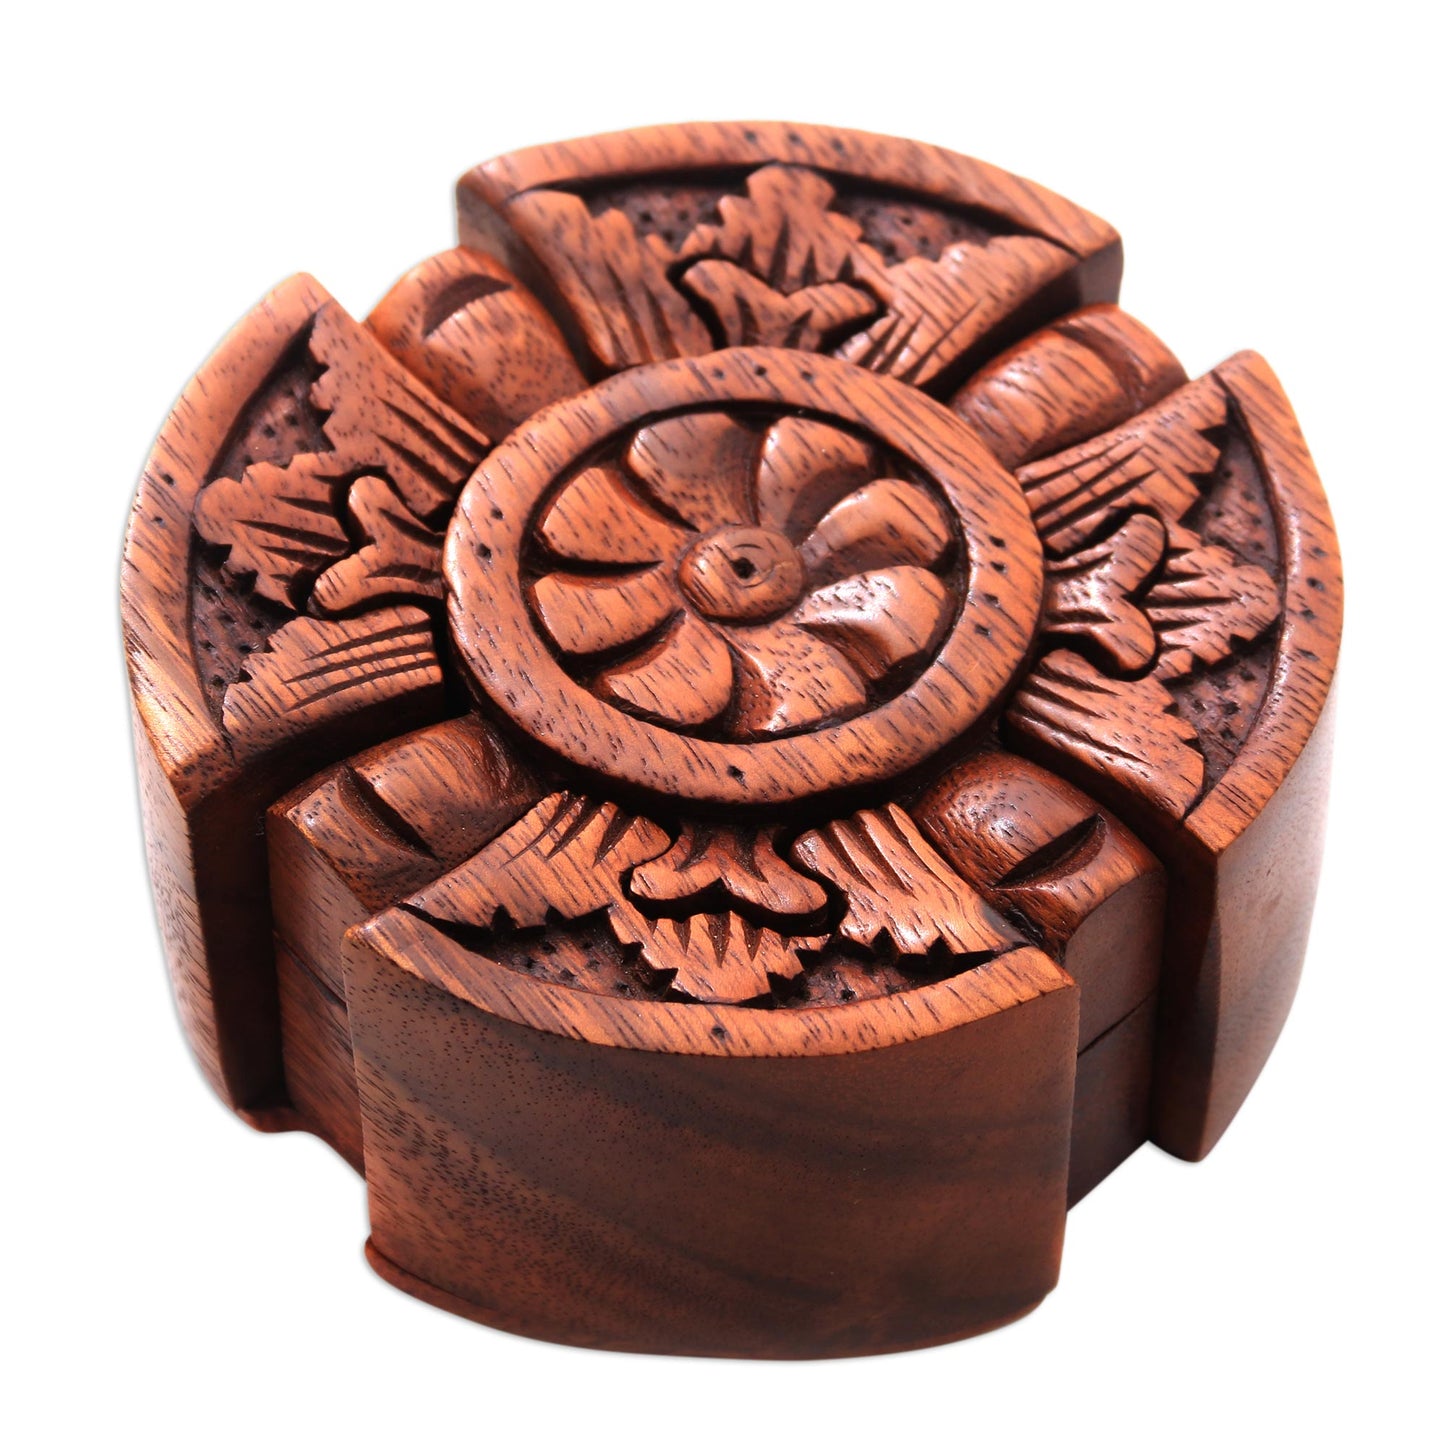 Floral Secret Floral Wood Puzzle Box Crafted in Bali